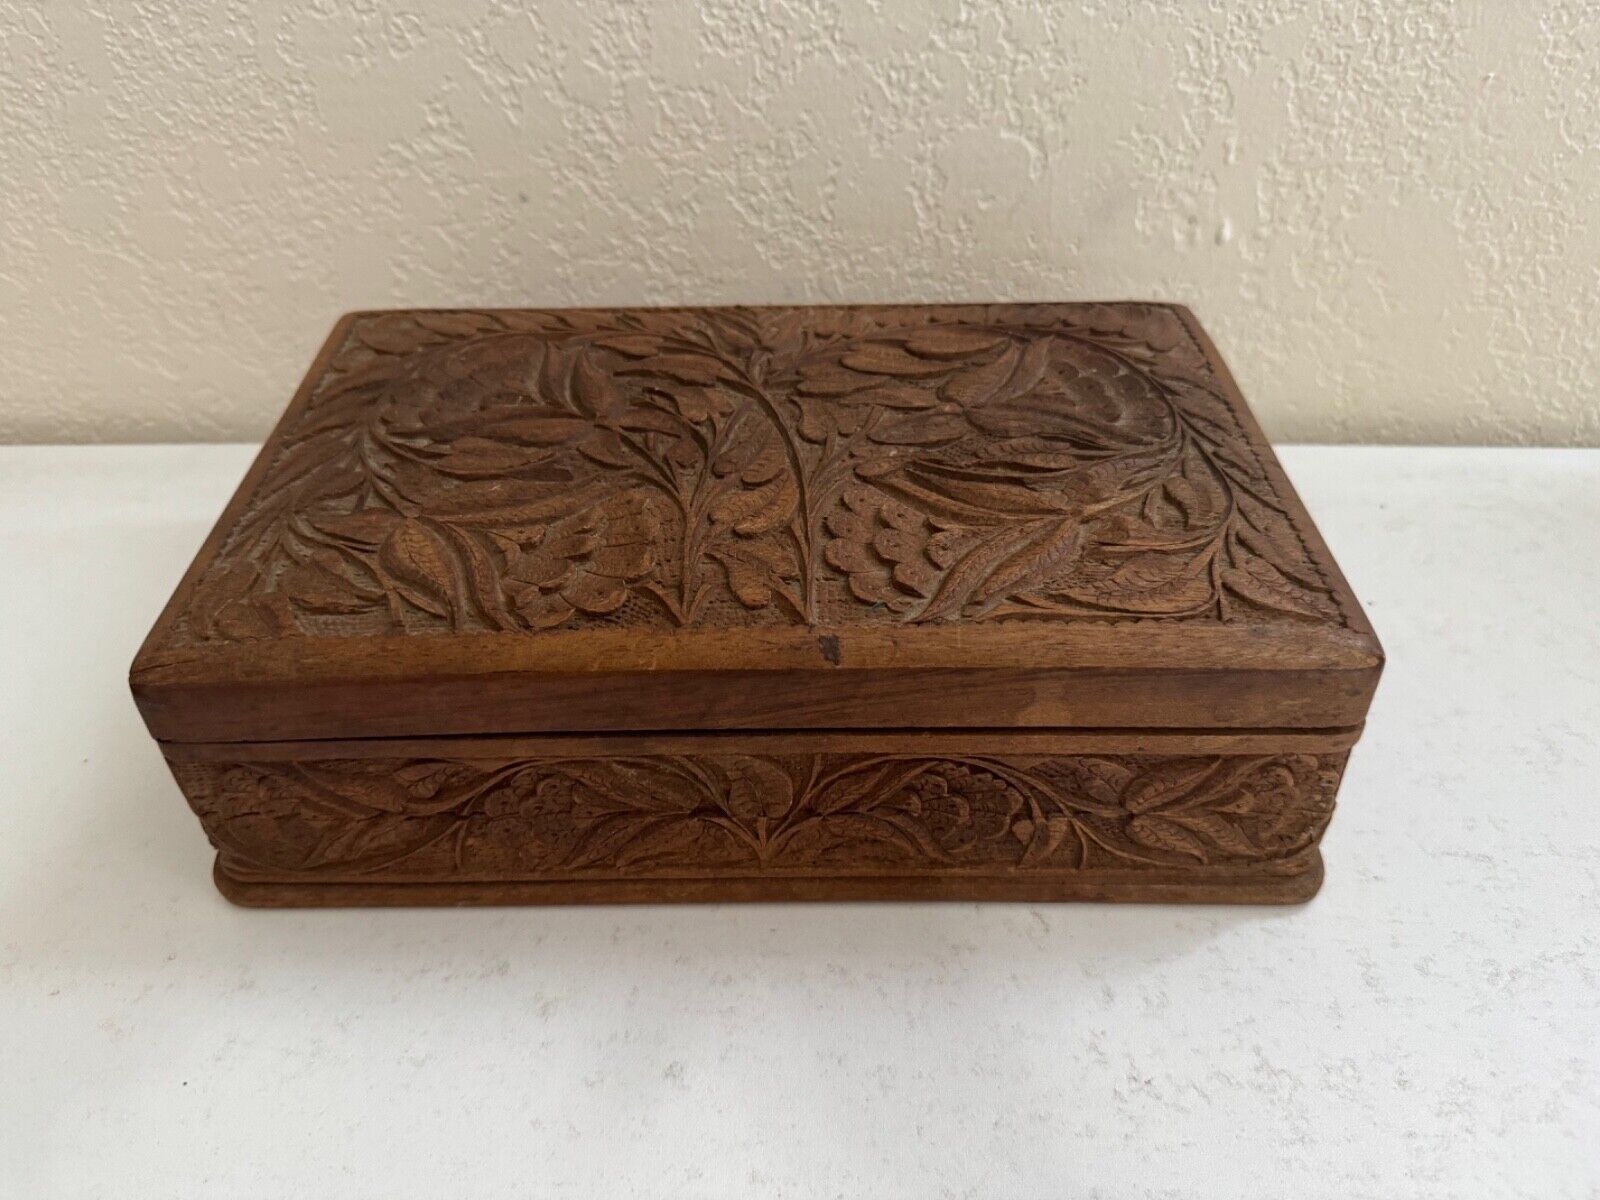 Vintage Southeast Asian Carved Wood Box w/ Floral & Foliage Designs